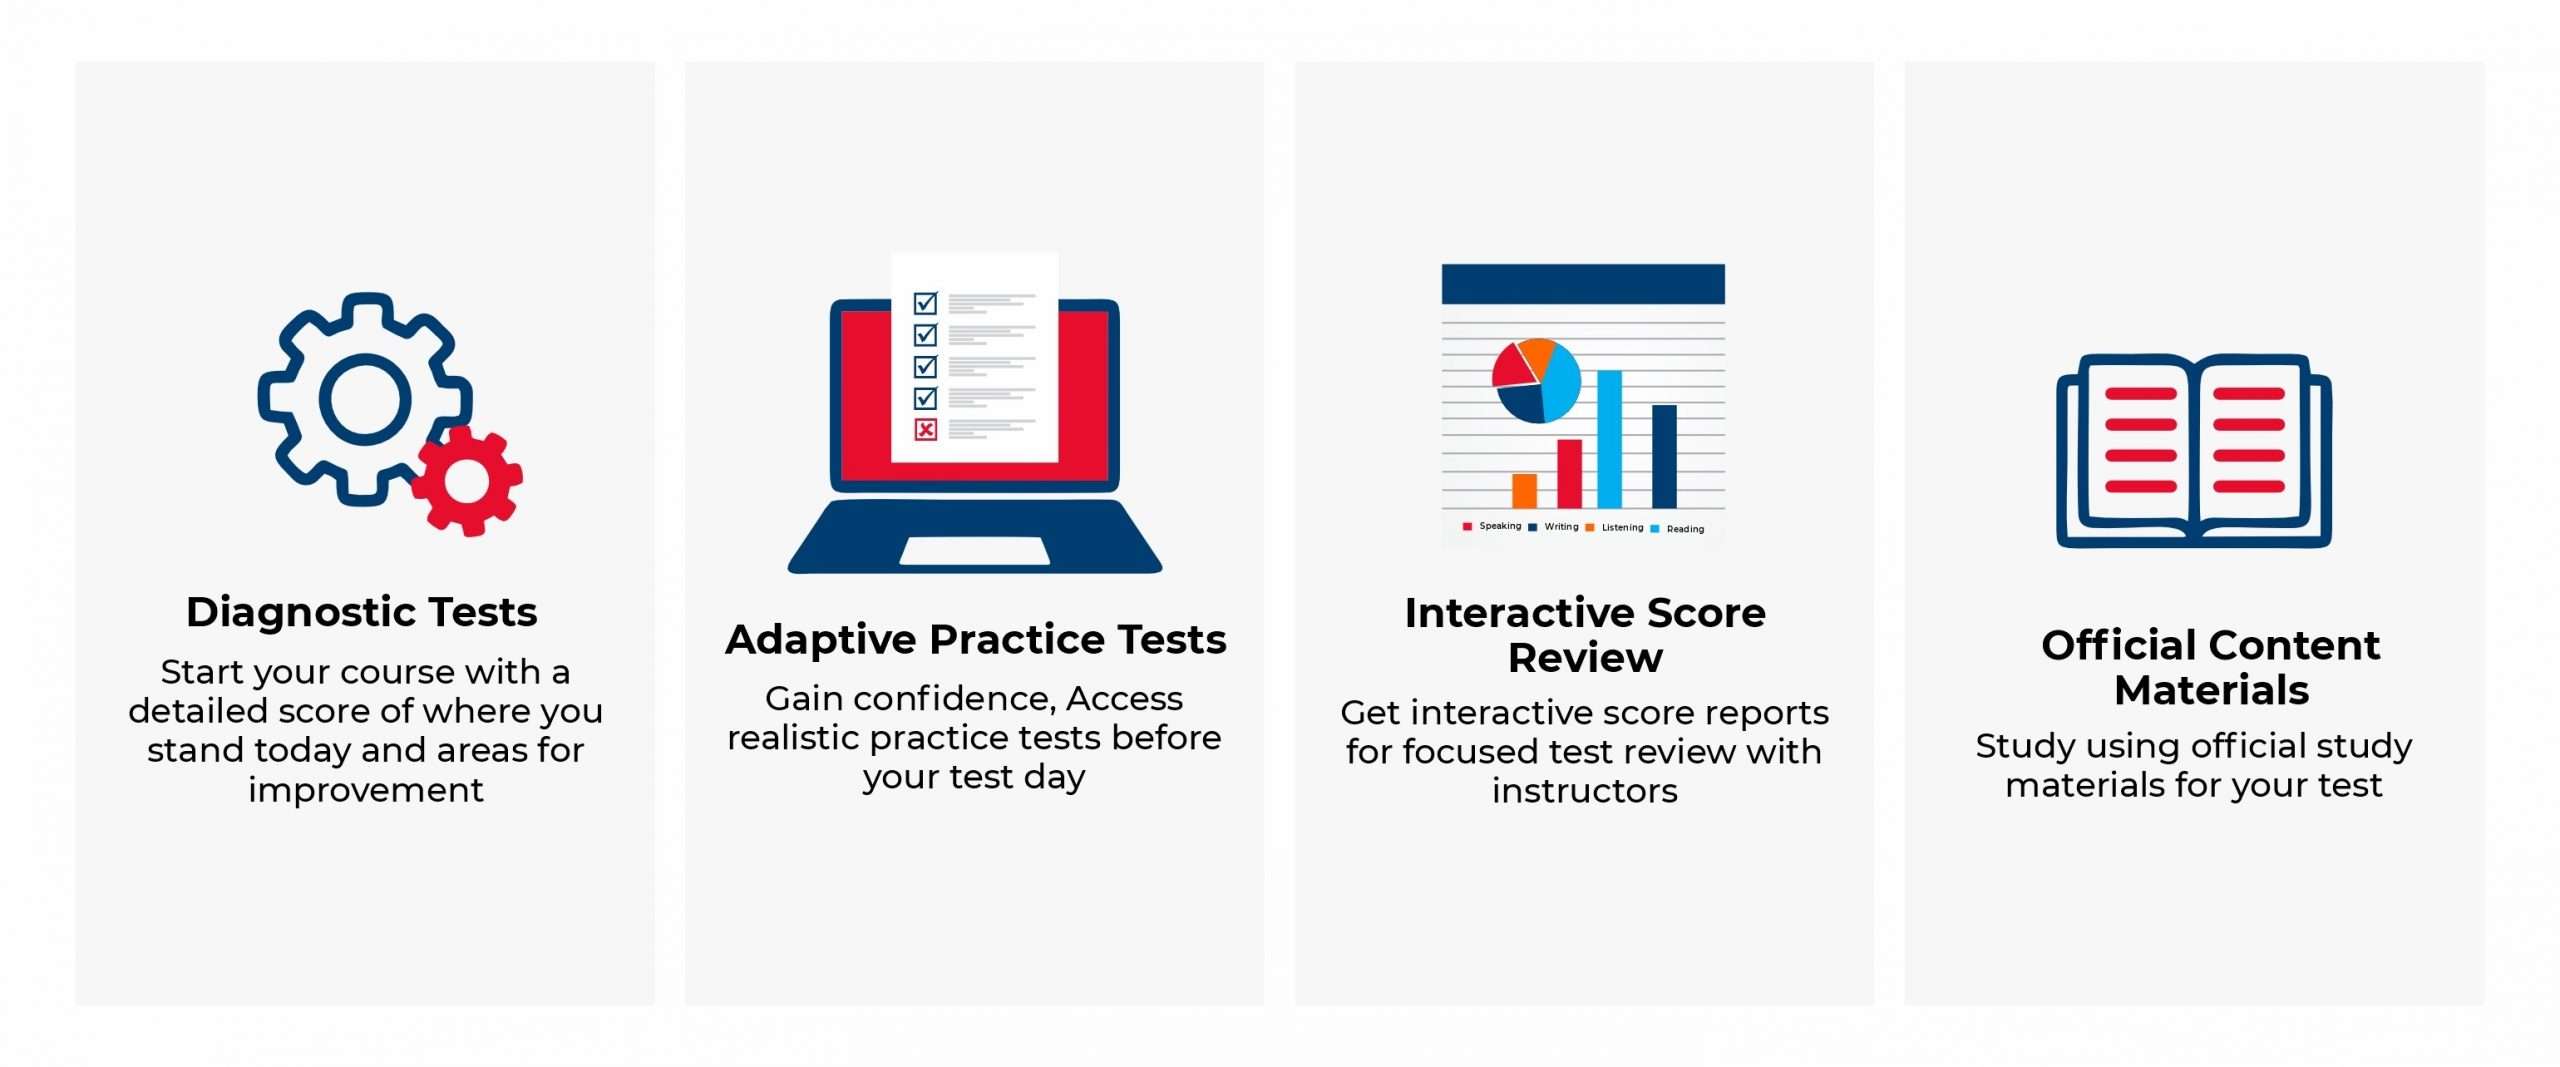 Infographic showing diagnostic test, adaptive practice test, interactive score review and official content materials